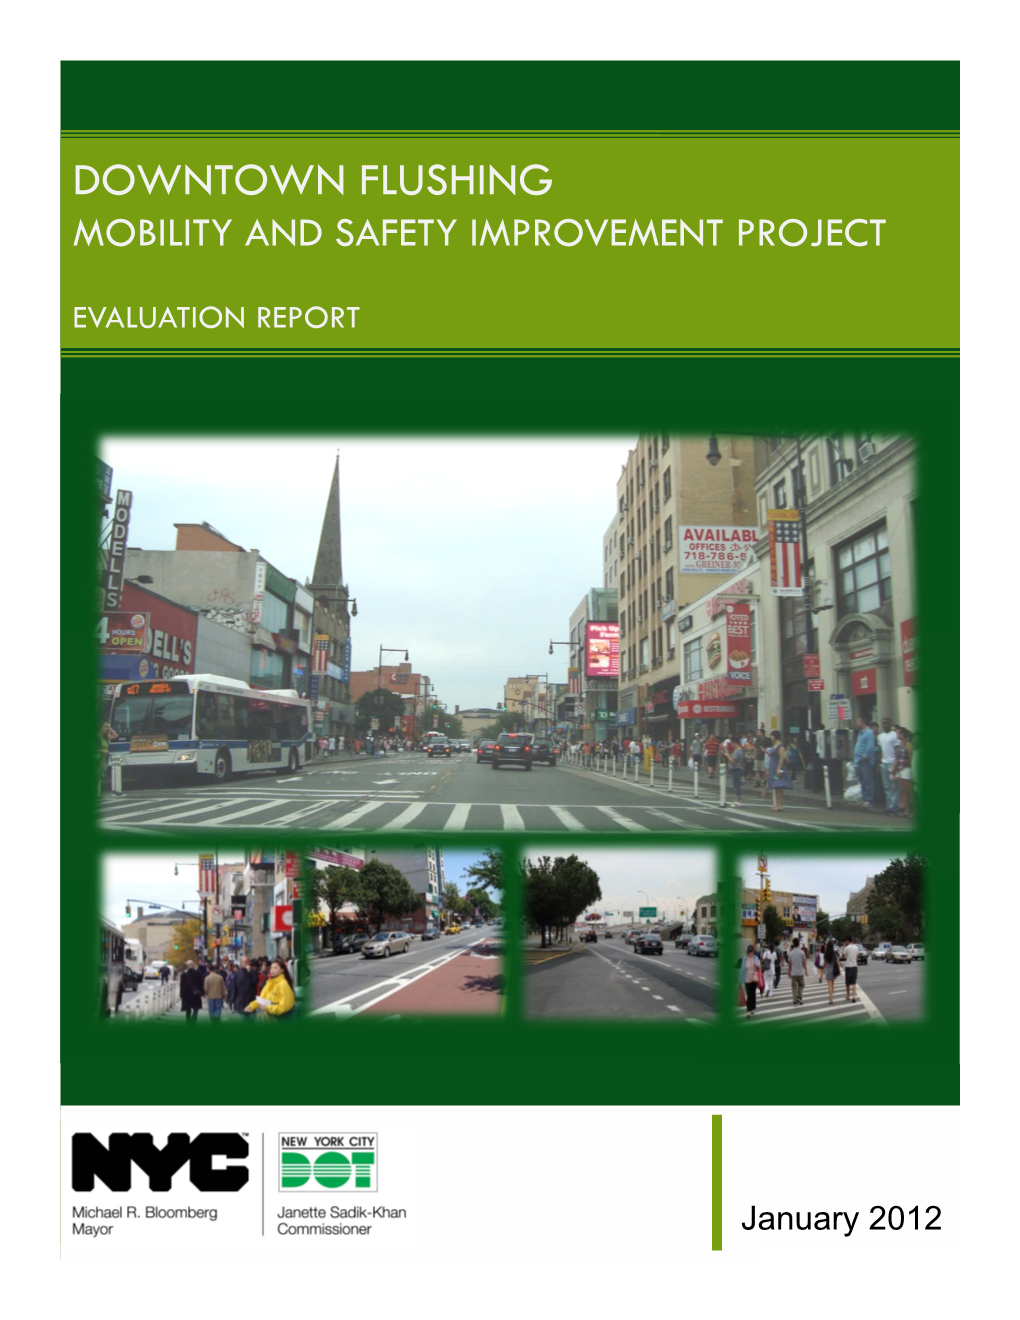 Downtown Flushing Mobility and Safety Improvement Project